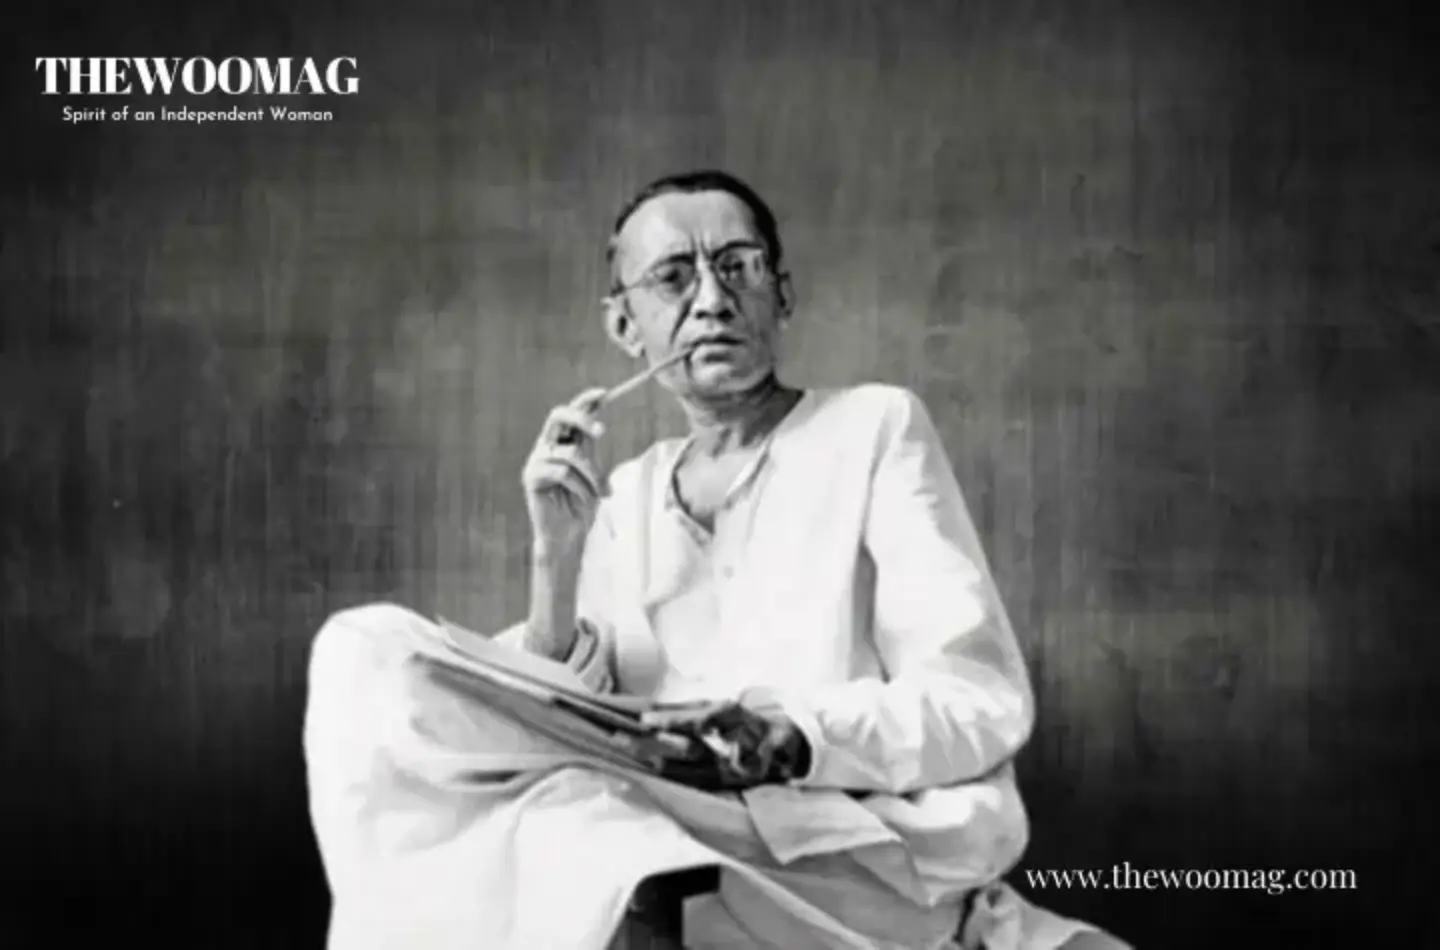 Manto-A Fascinating Story About A Fascinating Writer